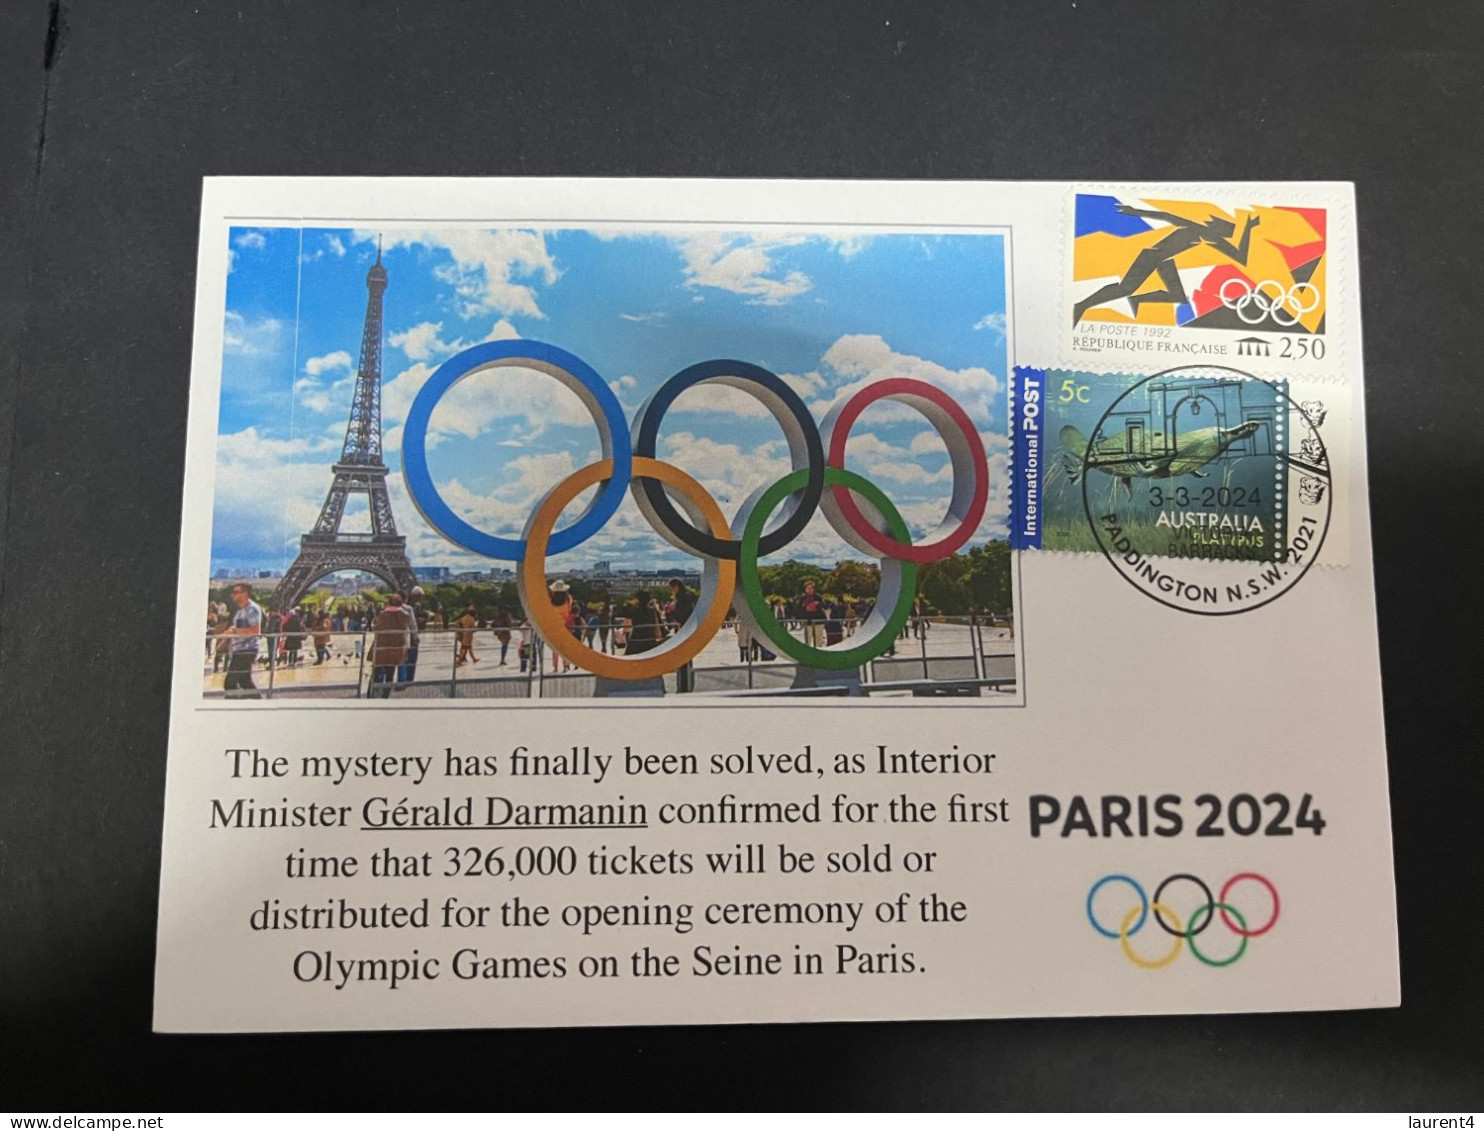 7-3-2024 (2 Y 22) Paris 2024 Summer Olympic - 326,000 Tickets Available To The Games Opening Ceremony On Seine River - Verano 2024 : París